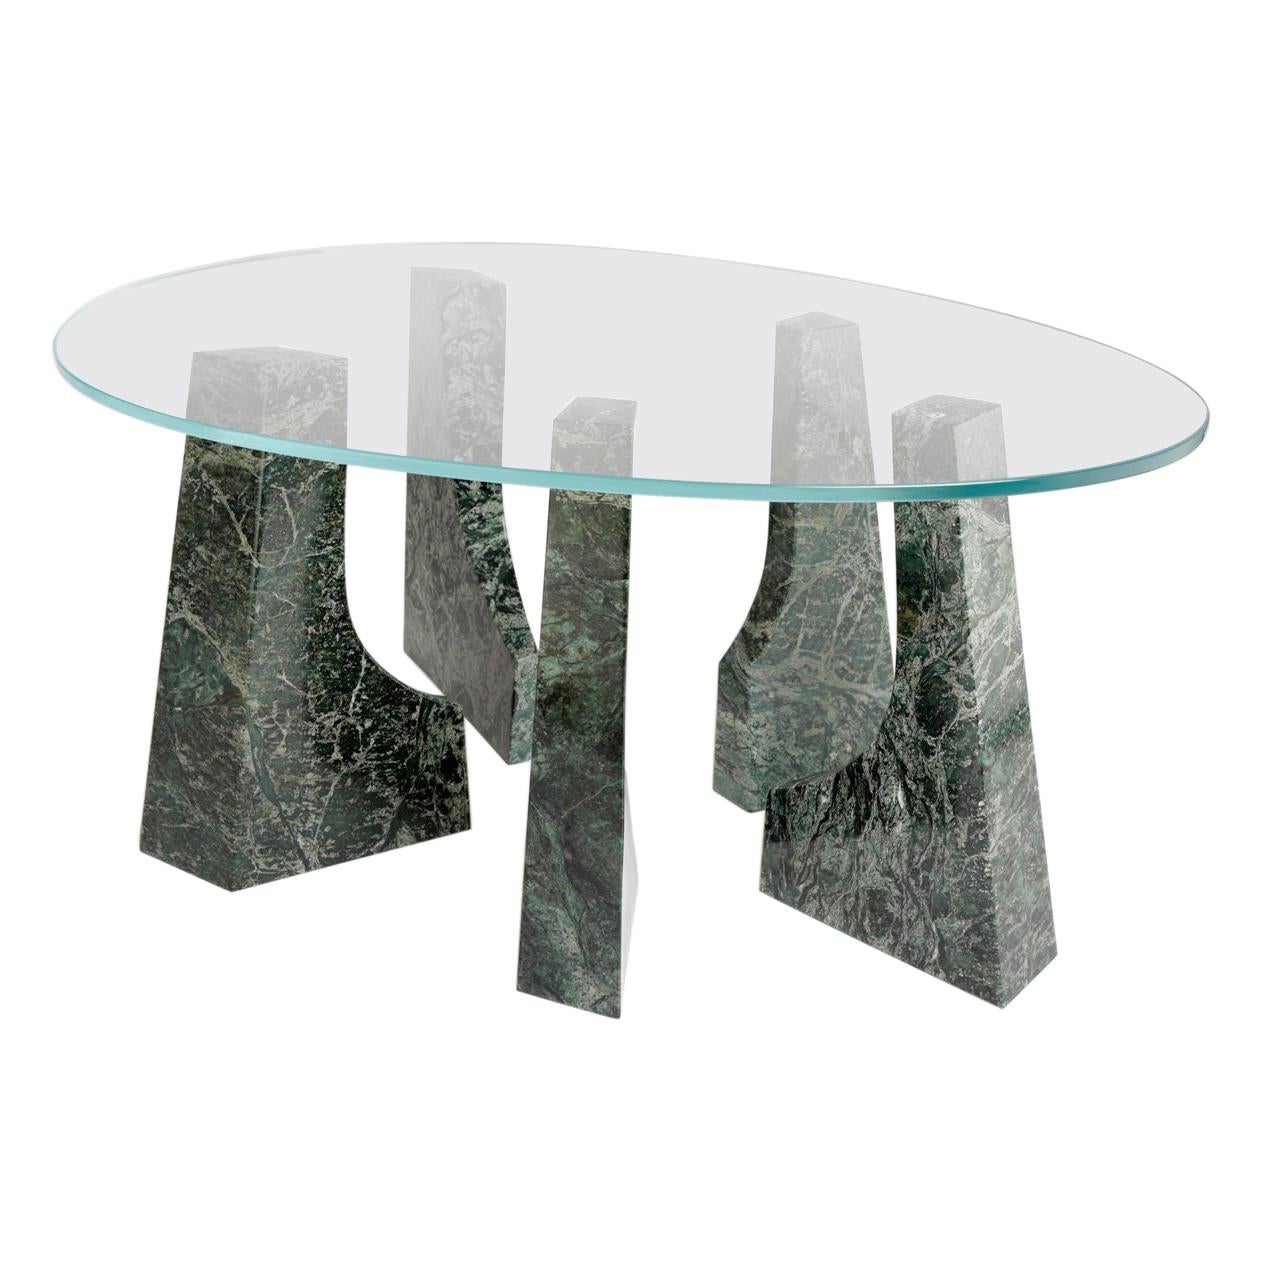 Trama Coffee Table by Comité de Proyectos For Sale